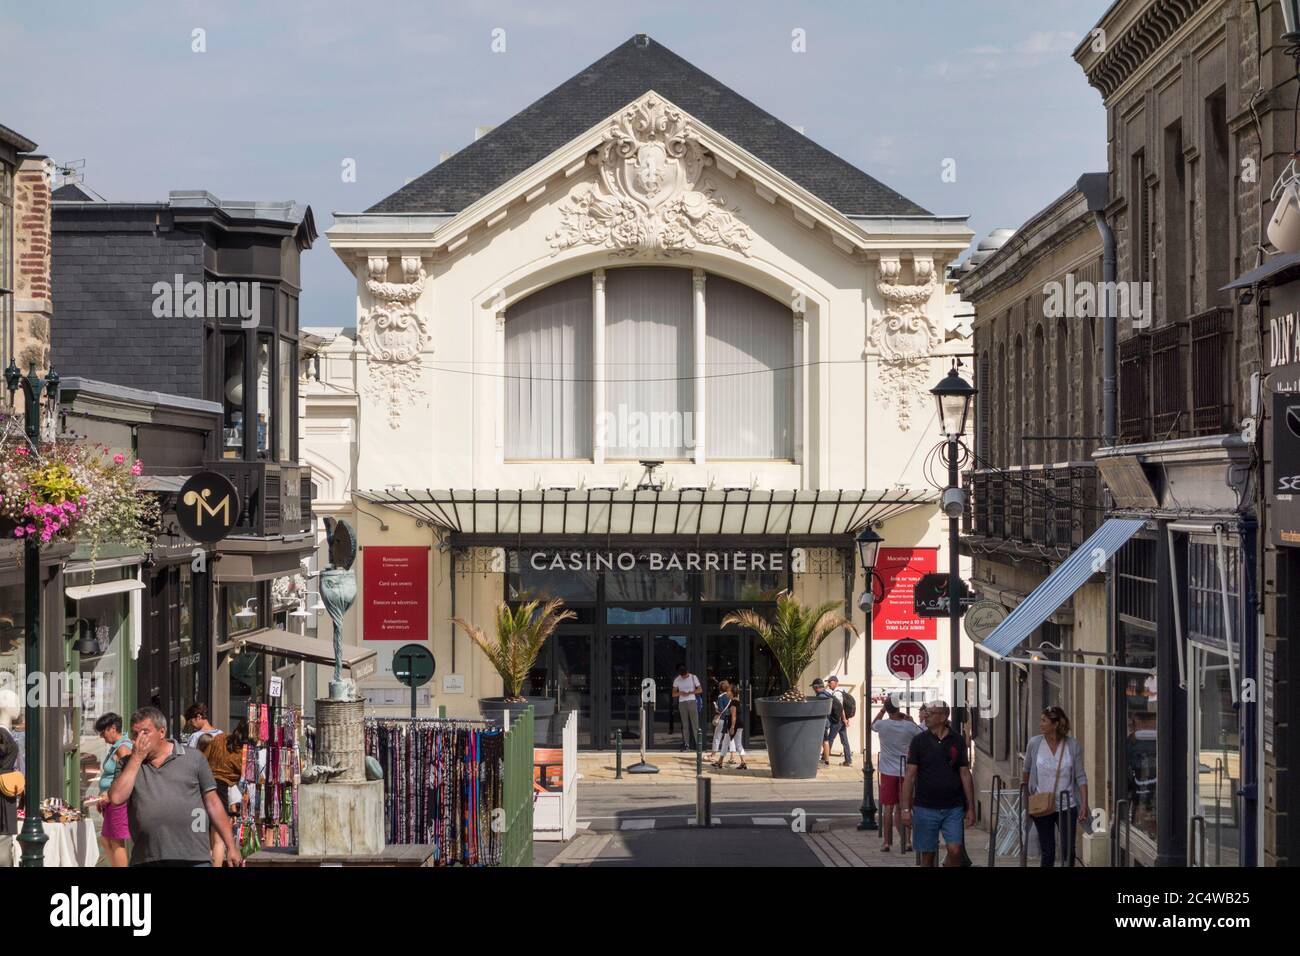 Casino Barriere building, Dinard, Brittany, France Stock Photo